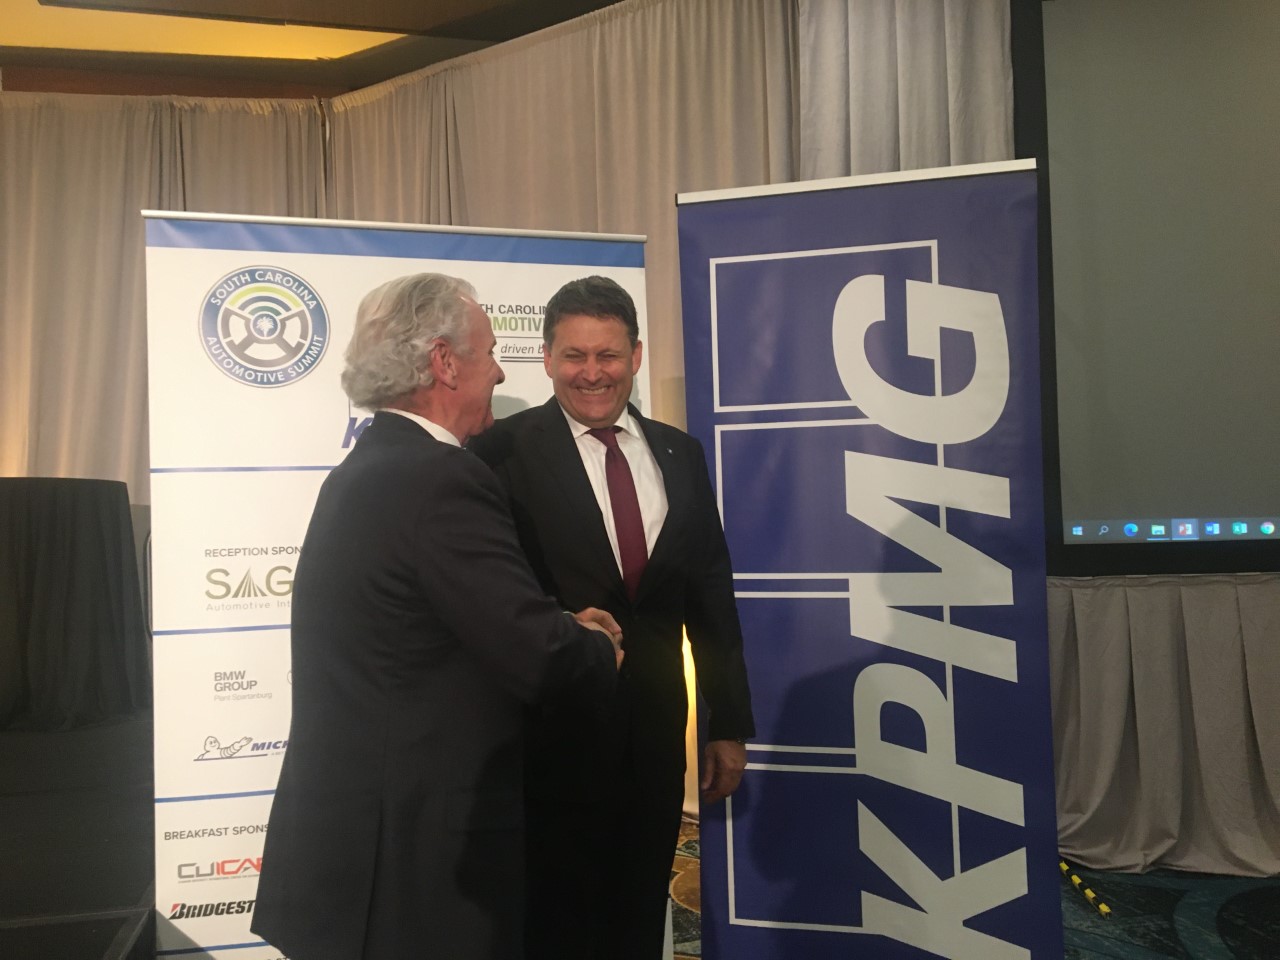 Gov. Henry McMaster shakes hands with Robert Englehorn at the S.C. Automotive Summit after the announcement. (Photo/Molly Hulsey)